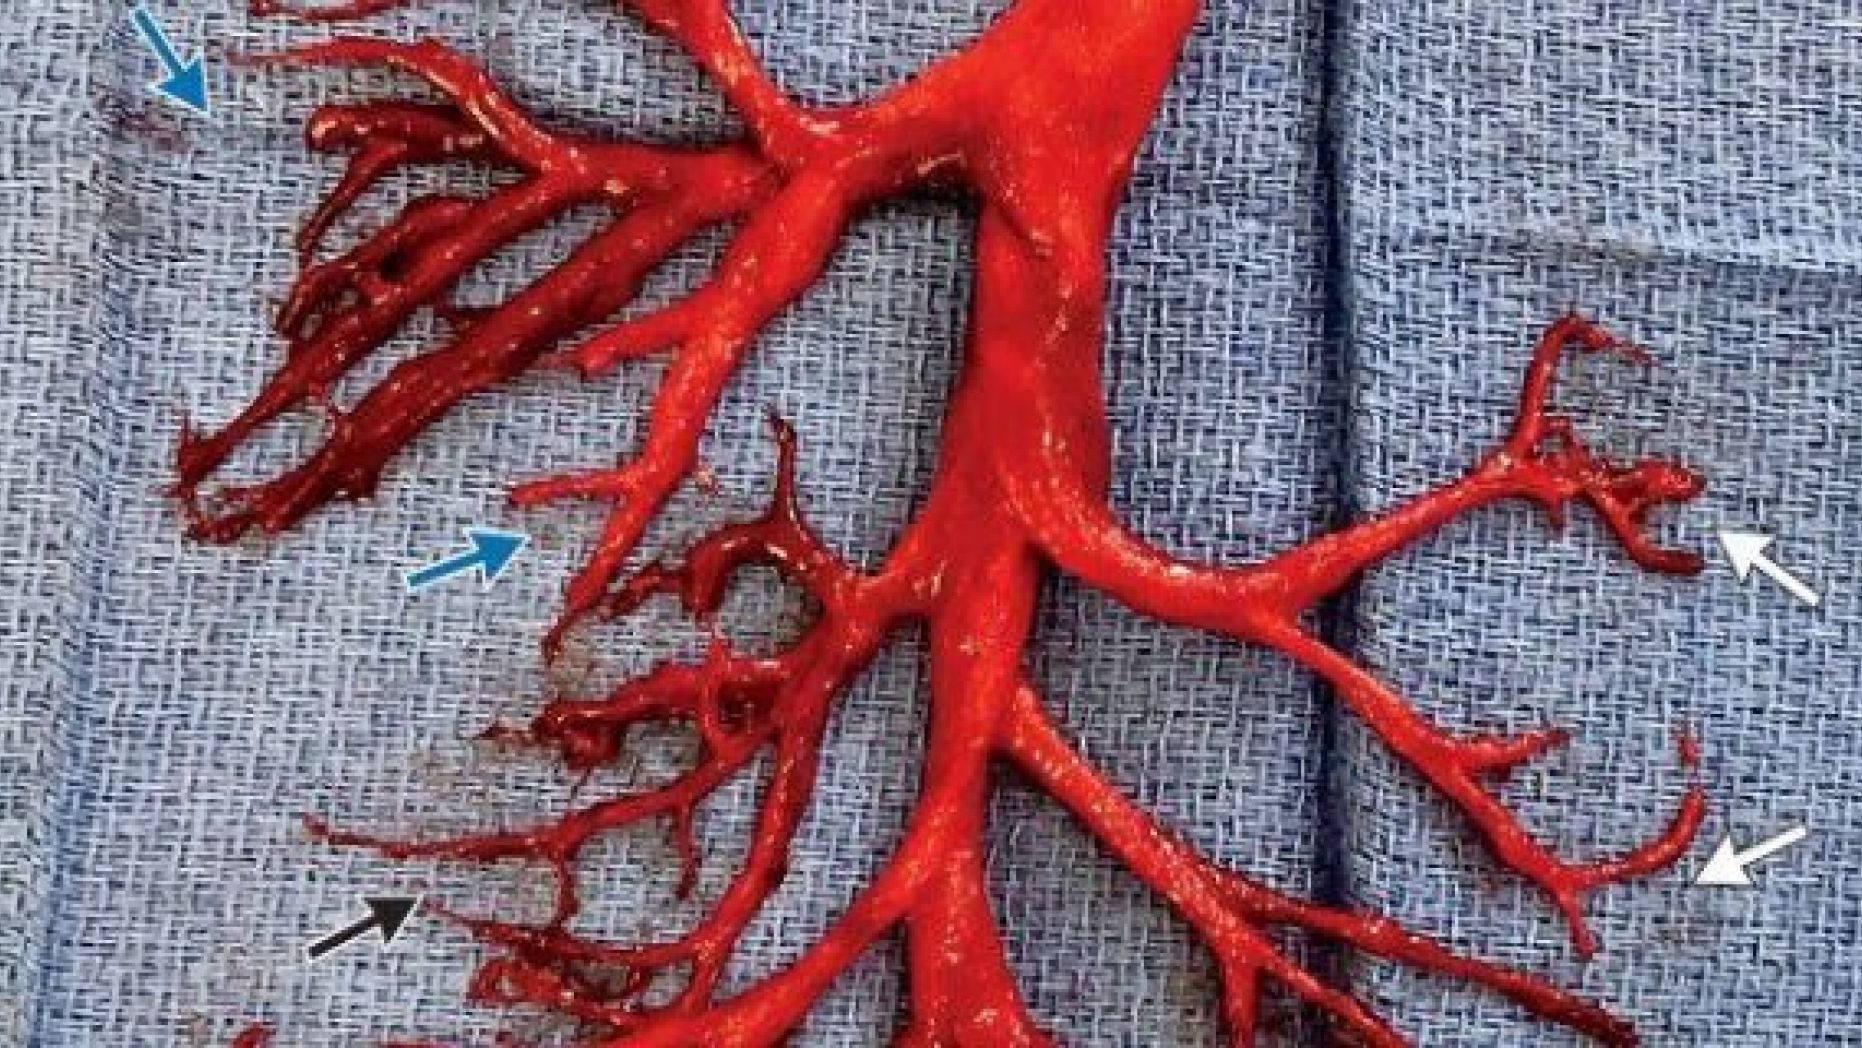 A man being treated for heart failure coughed out a cast of the right bronchial tree after doctors placed a ventricular assist device and began anticoagulation therapy.